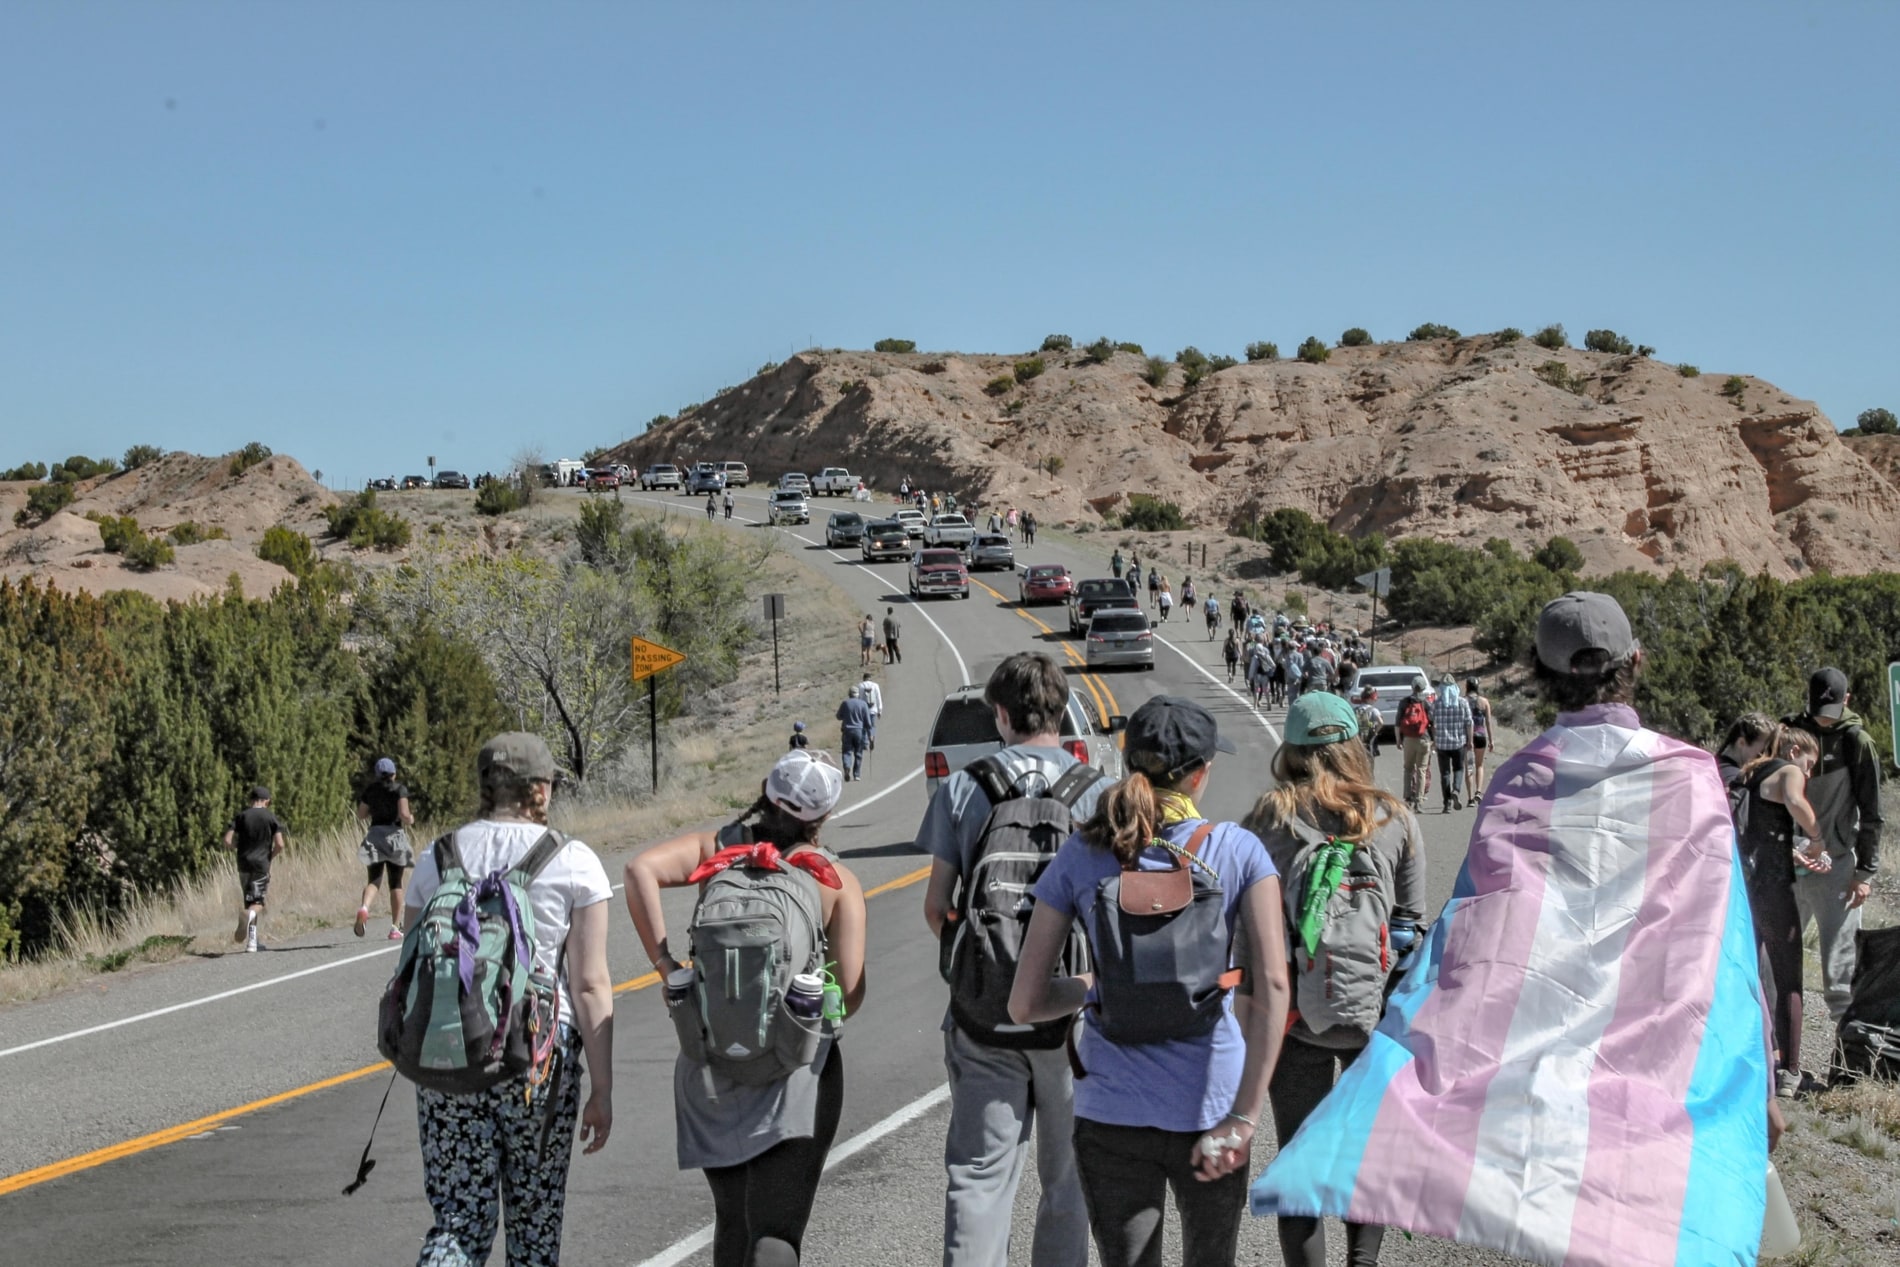 Church youth group travel up a road with a youth carrying flag of transgender symbol